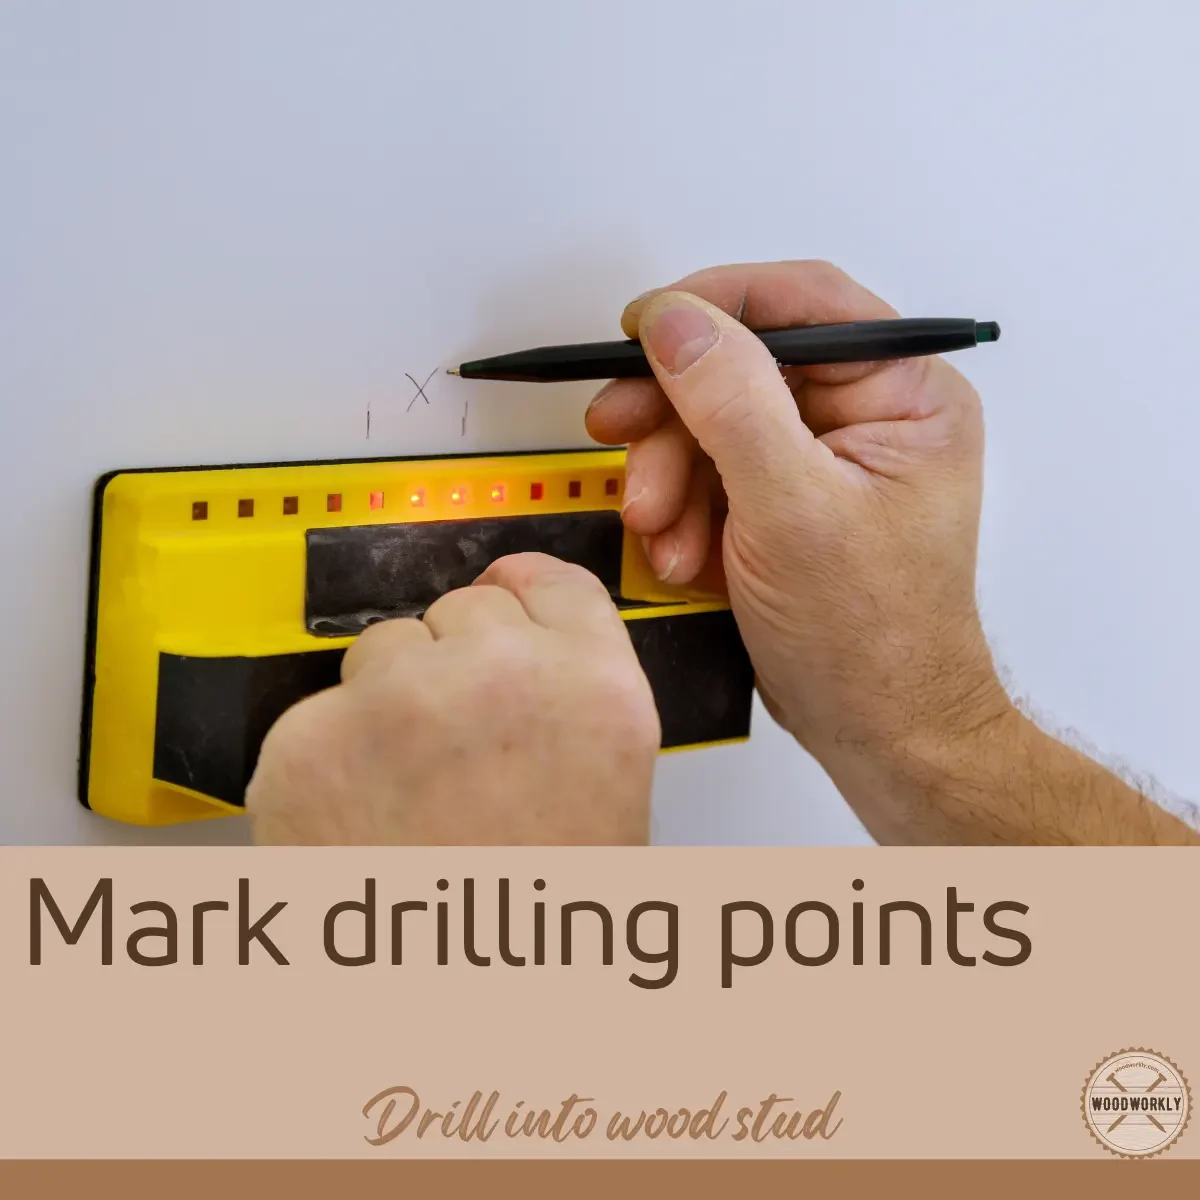 mark drilling points in wood stud